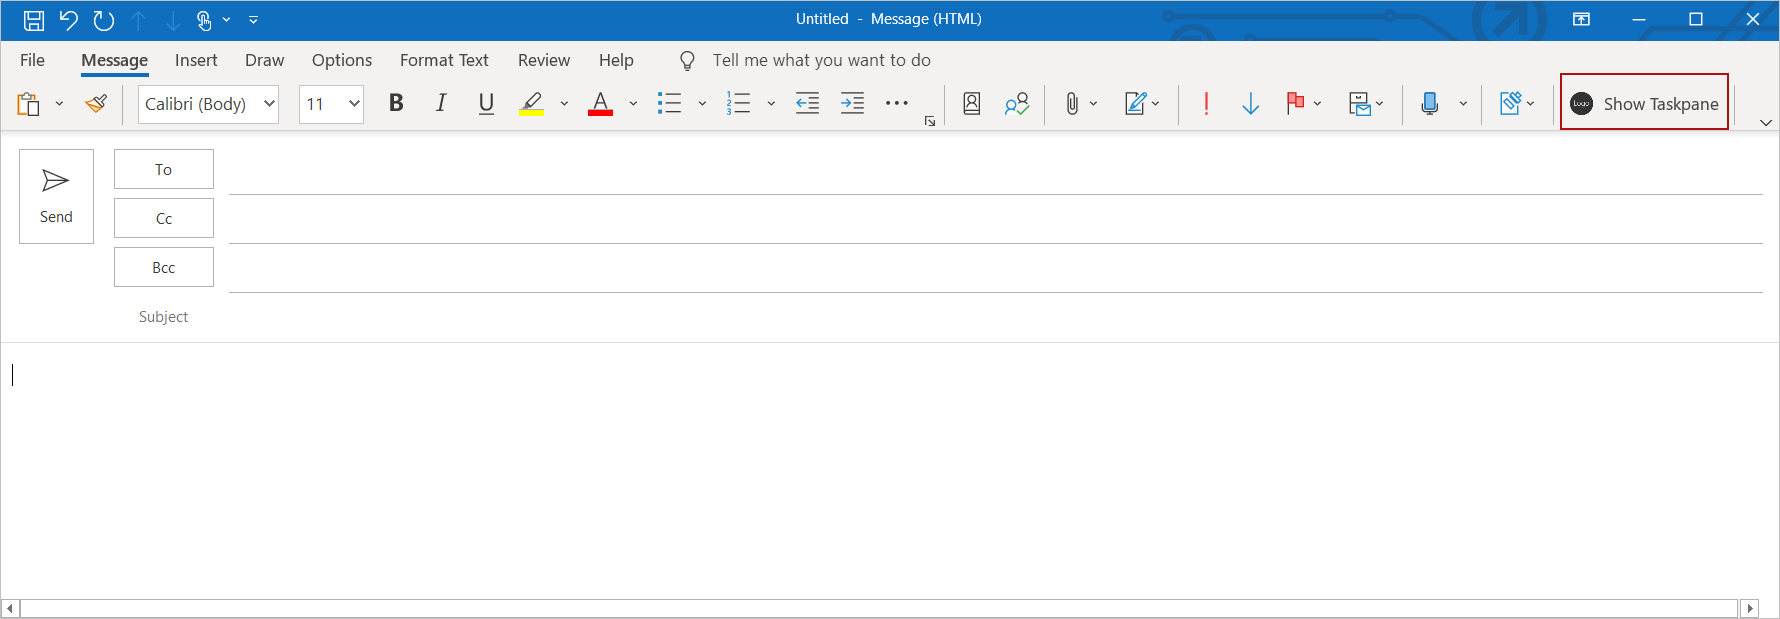 Screenshot showing highlighted add-in ribbon button in Outlook compose message window.